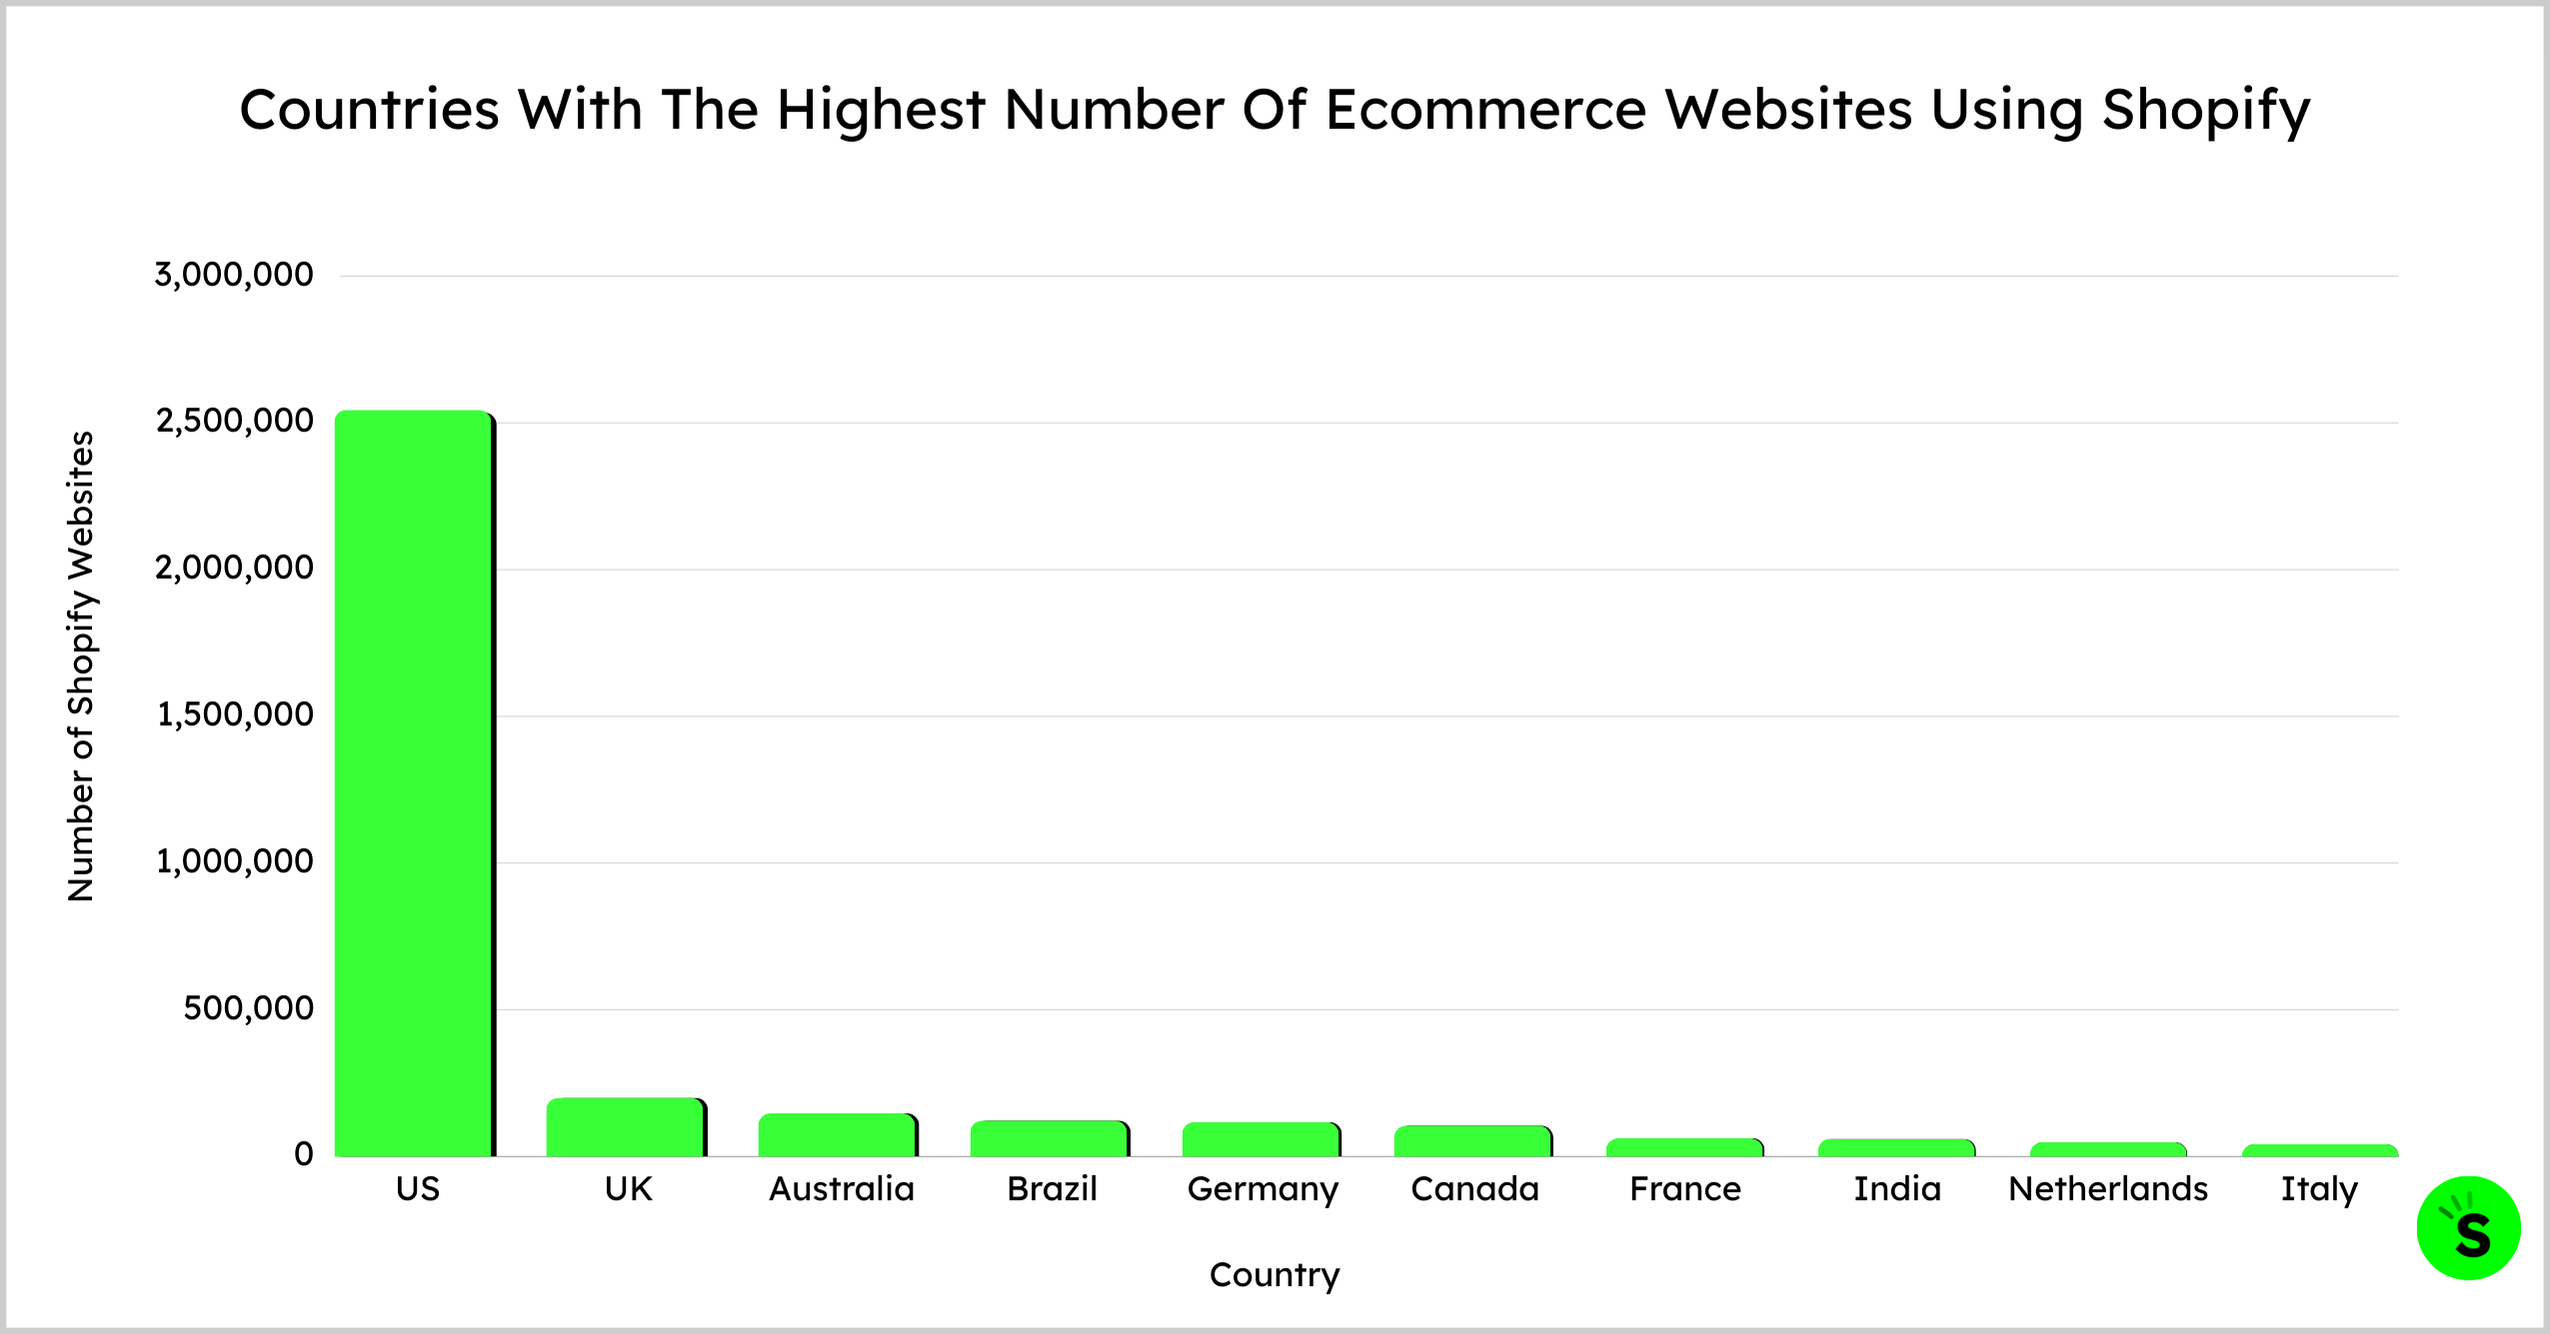 Countries With The Highest Number Of Ecommerce Websites 